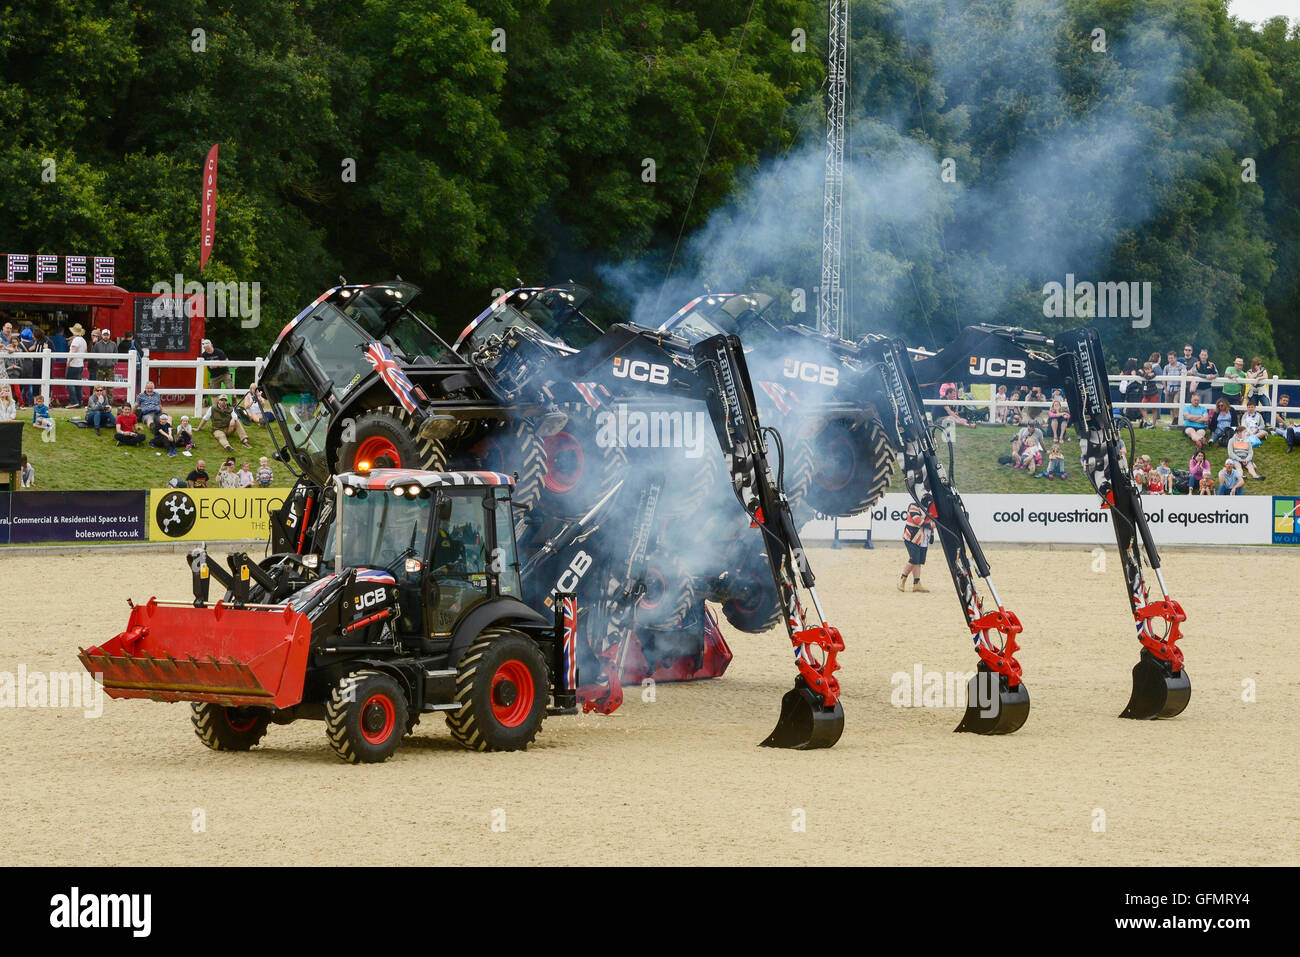 Carfest North, Bolesworth, Cheshire, UK. 31st July 2016. A choreographed display of JCB tigers in the Showground arena. The event is the brainchild of Chris Evans and features 3 days of cars, music and entertainment with profits being donated to the charity Children in Need. Andrew Paterson/Alamy Live News Stock Photo